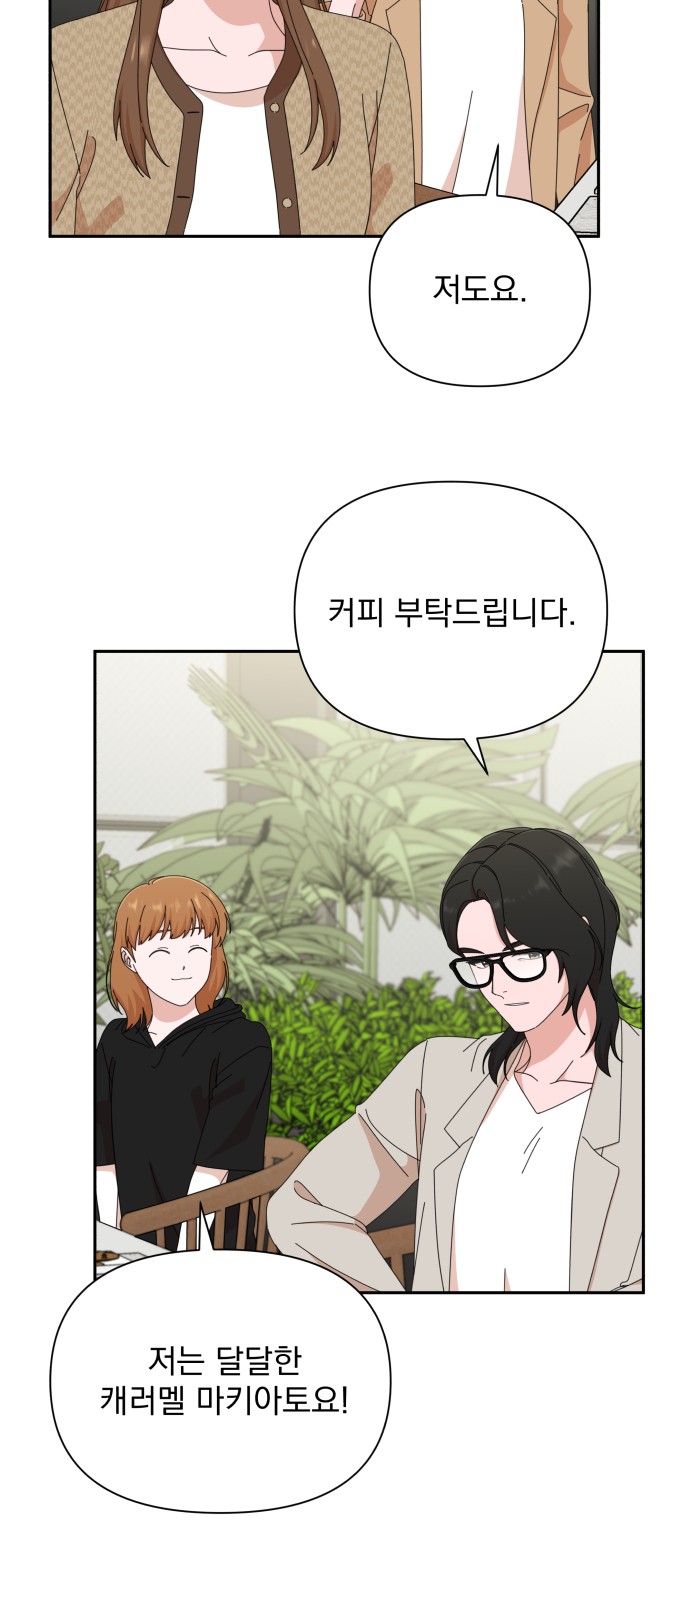 The Man With Pretty Lips - Chapter 45 - Page 3